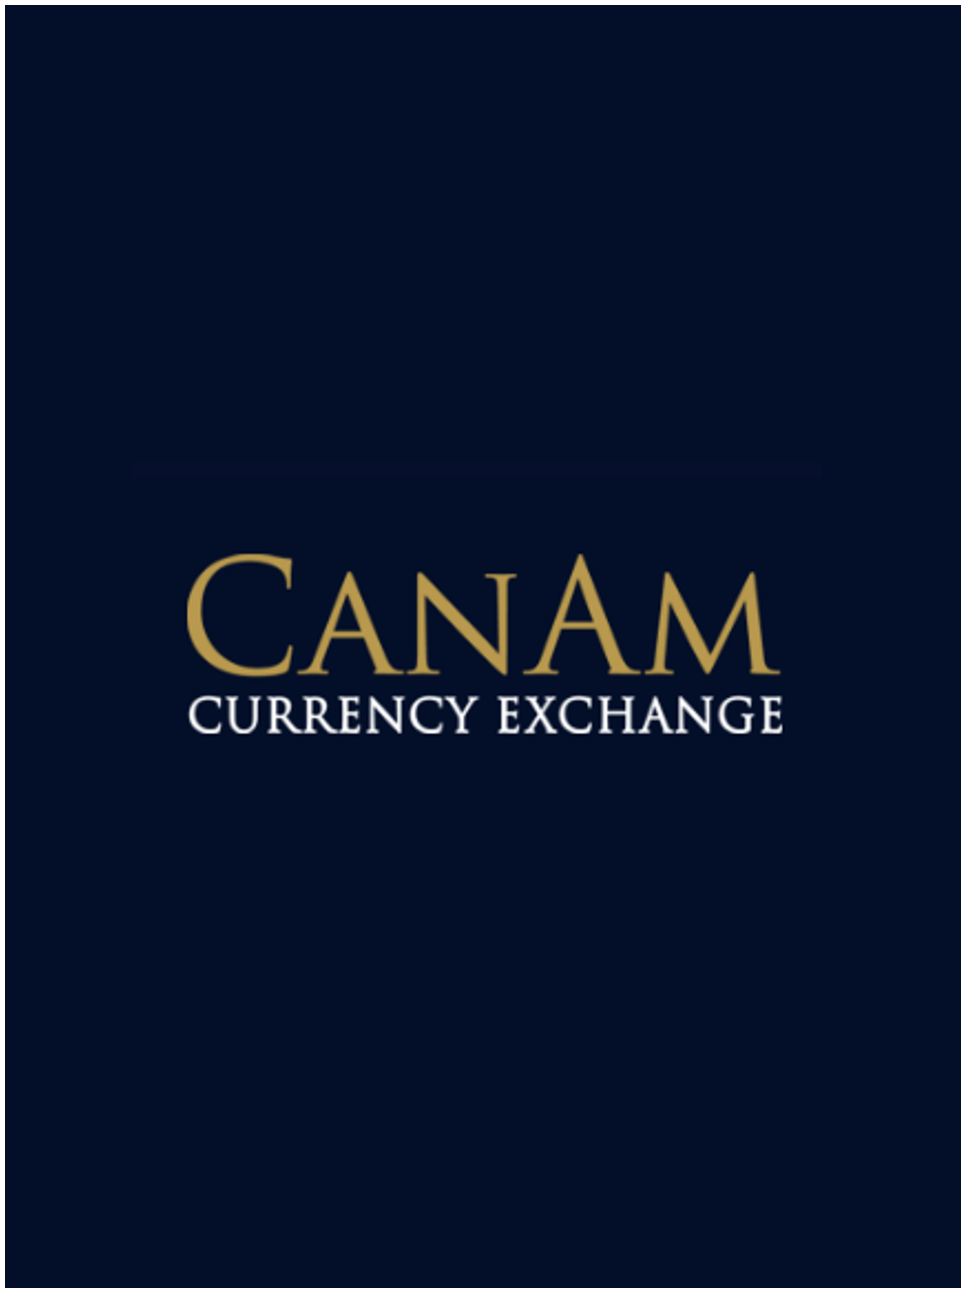 CanAm Currency Exchange Offers The Best USD/CAD Rates For Cross-Border Students